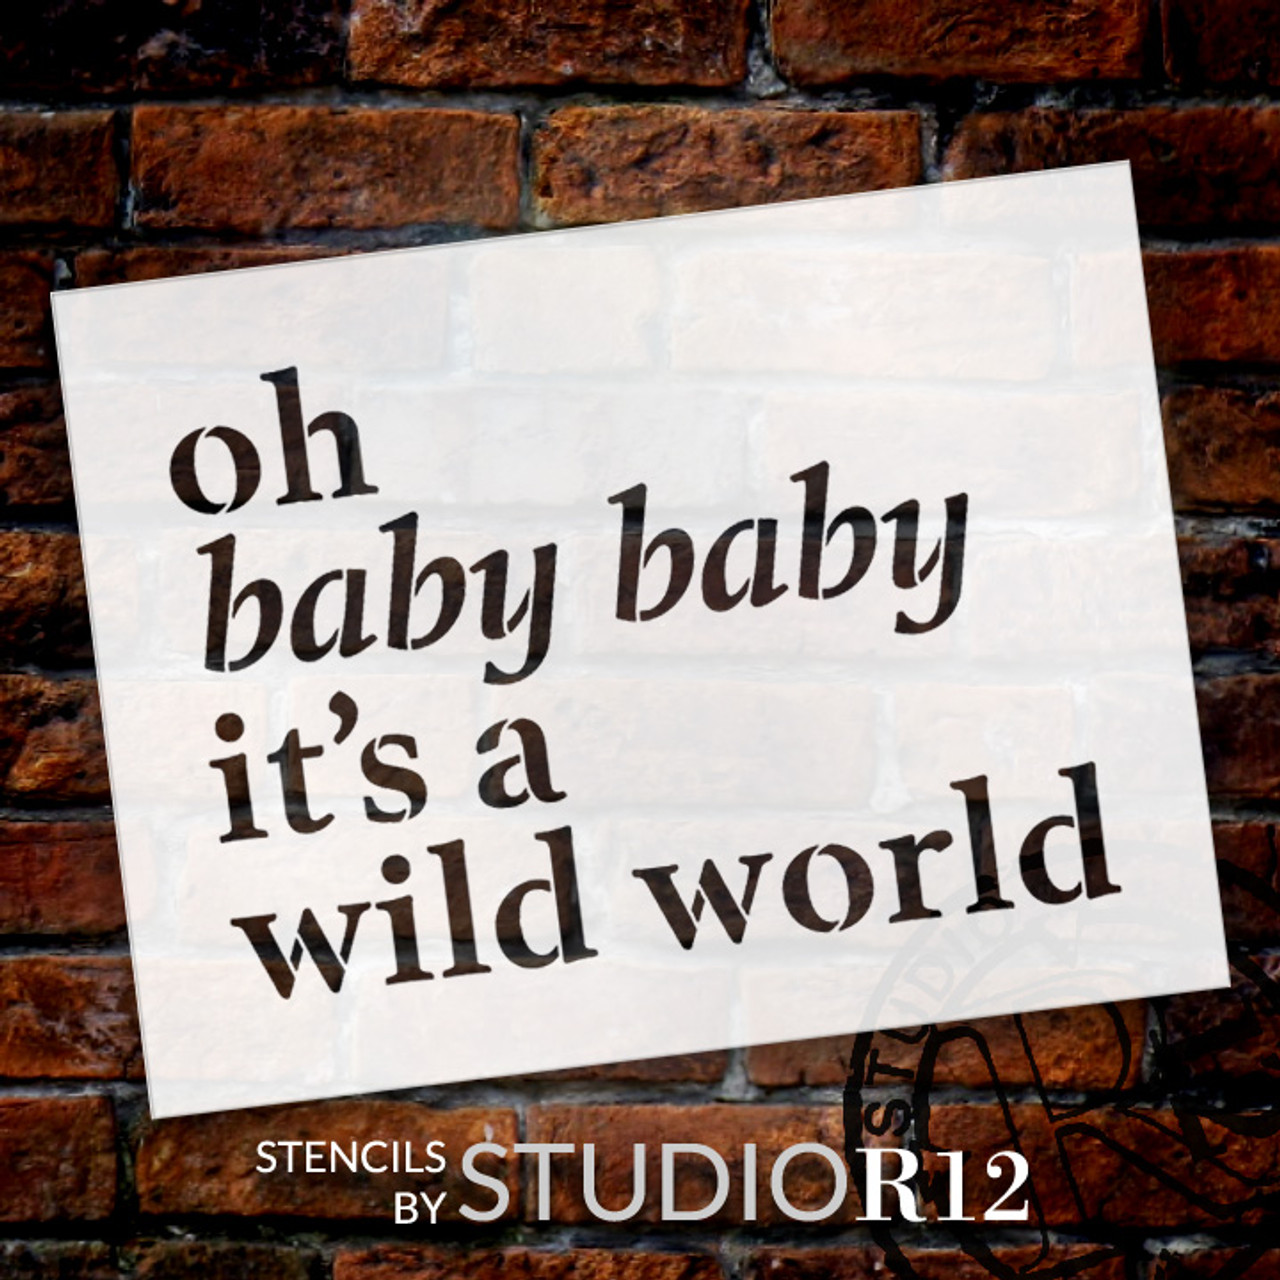 Oh Baby Baby - Word Stencil - 9" x 7" - STCL1843_1 - by StudioR12